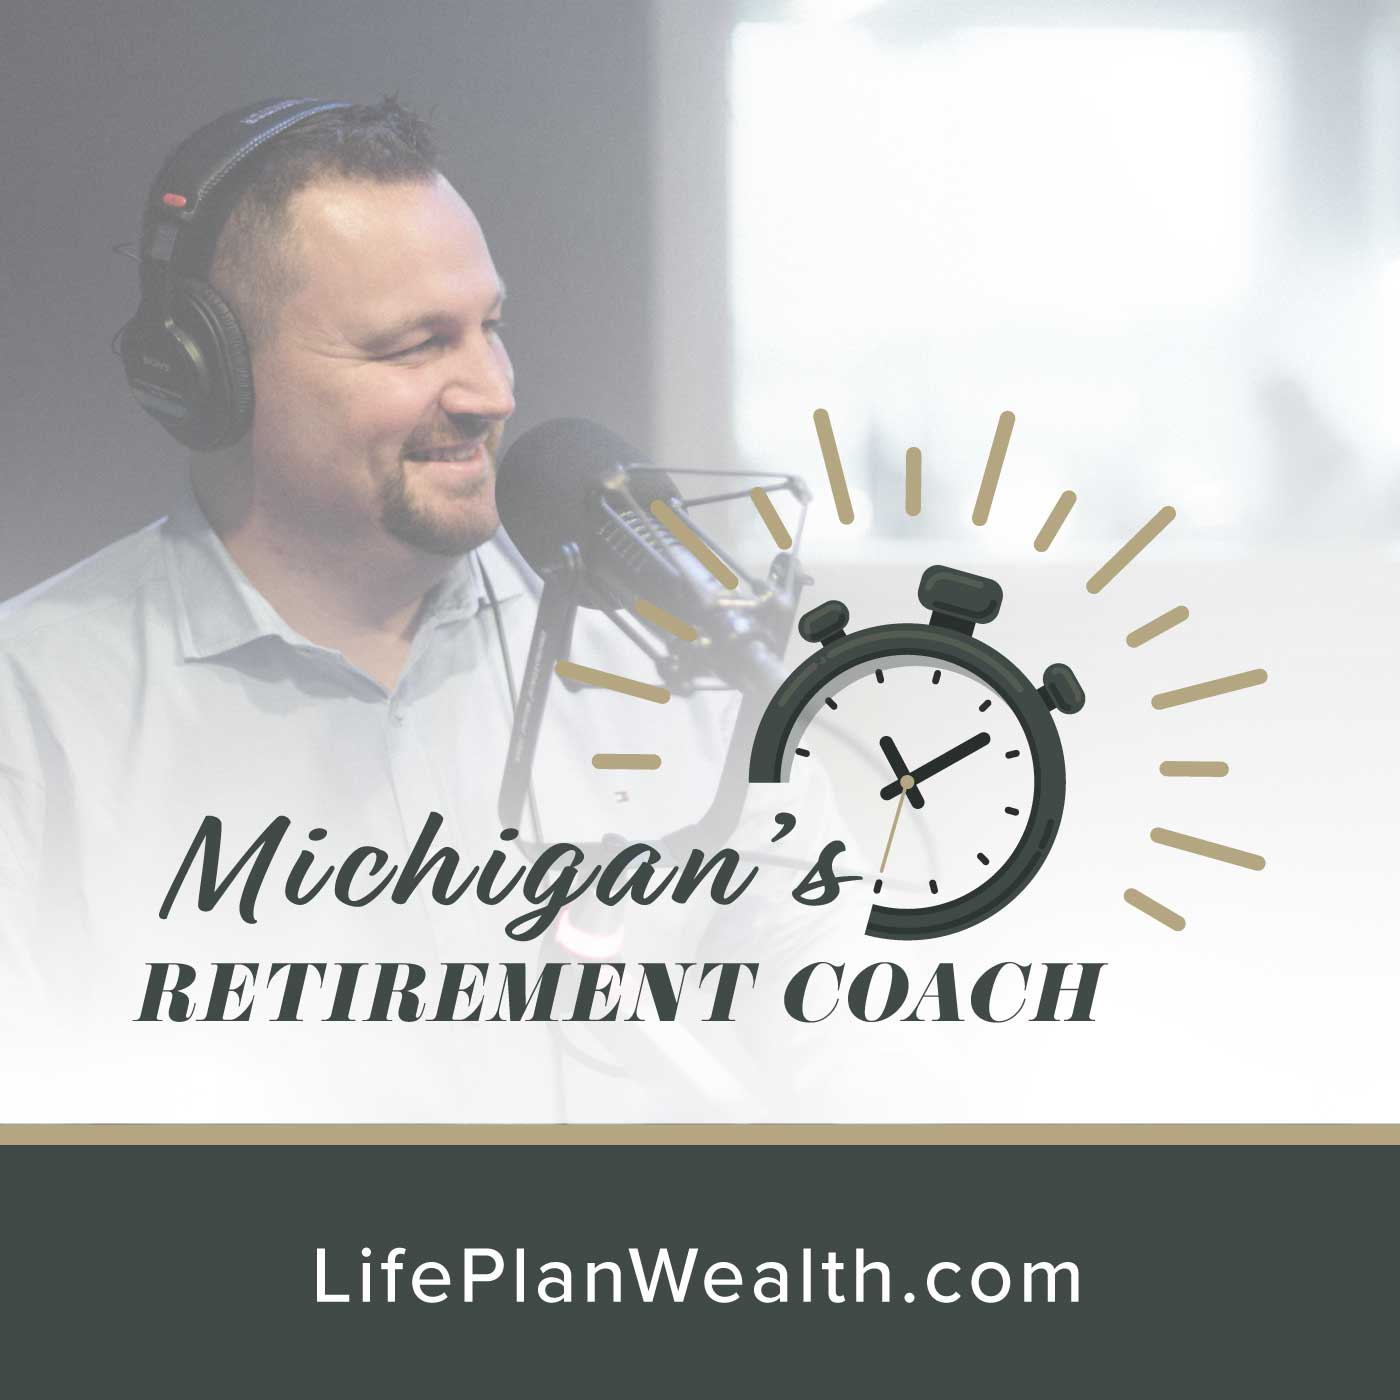 Not ready for retirement? You're not alone. Michigan's Retirement Coach can help.